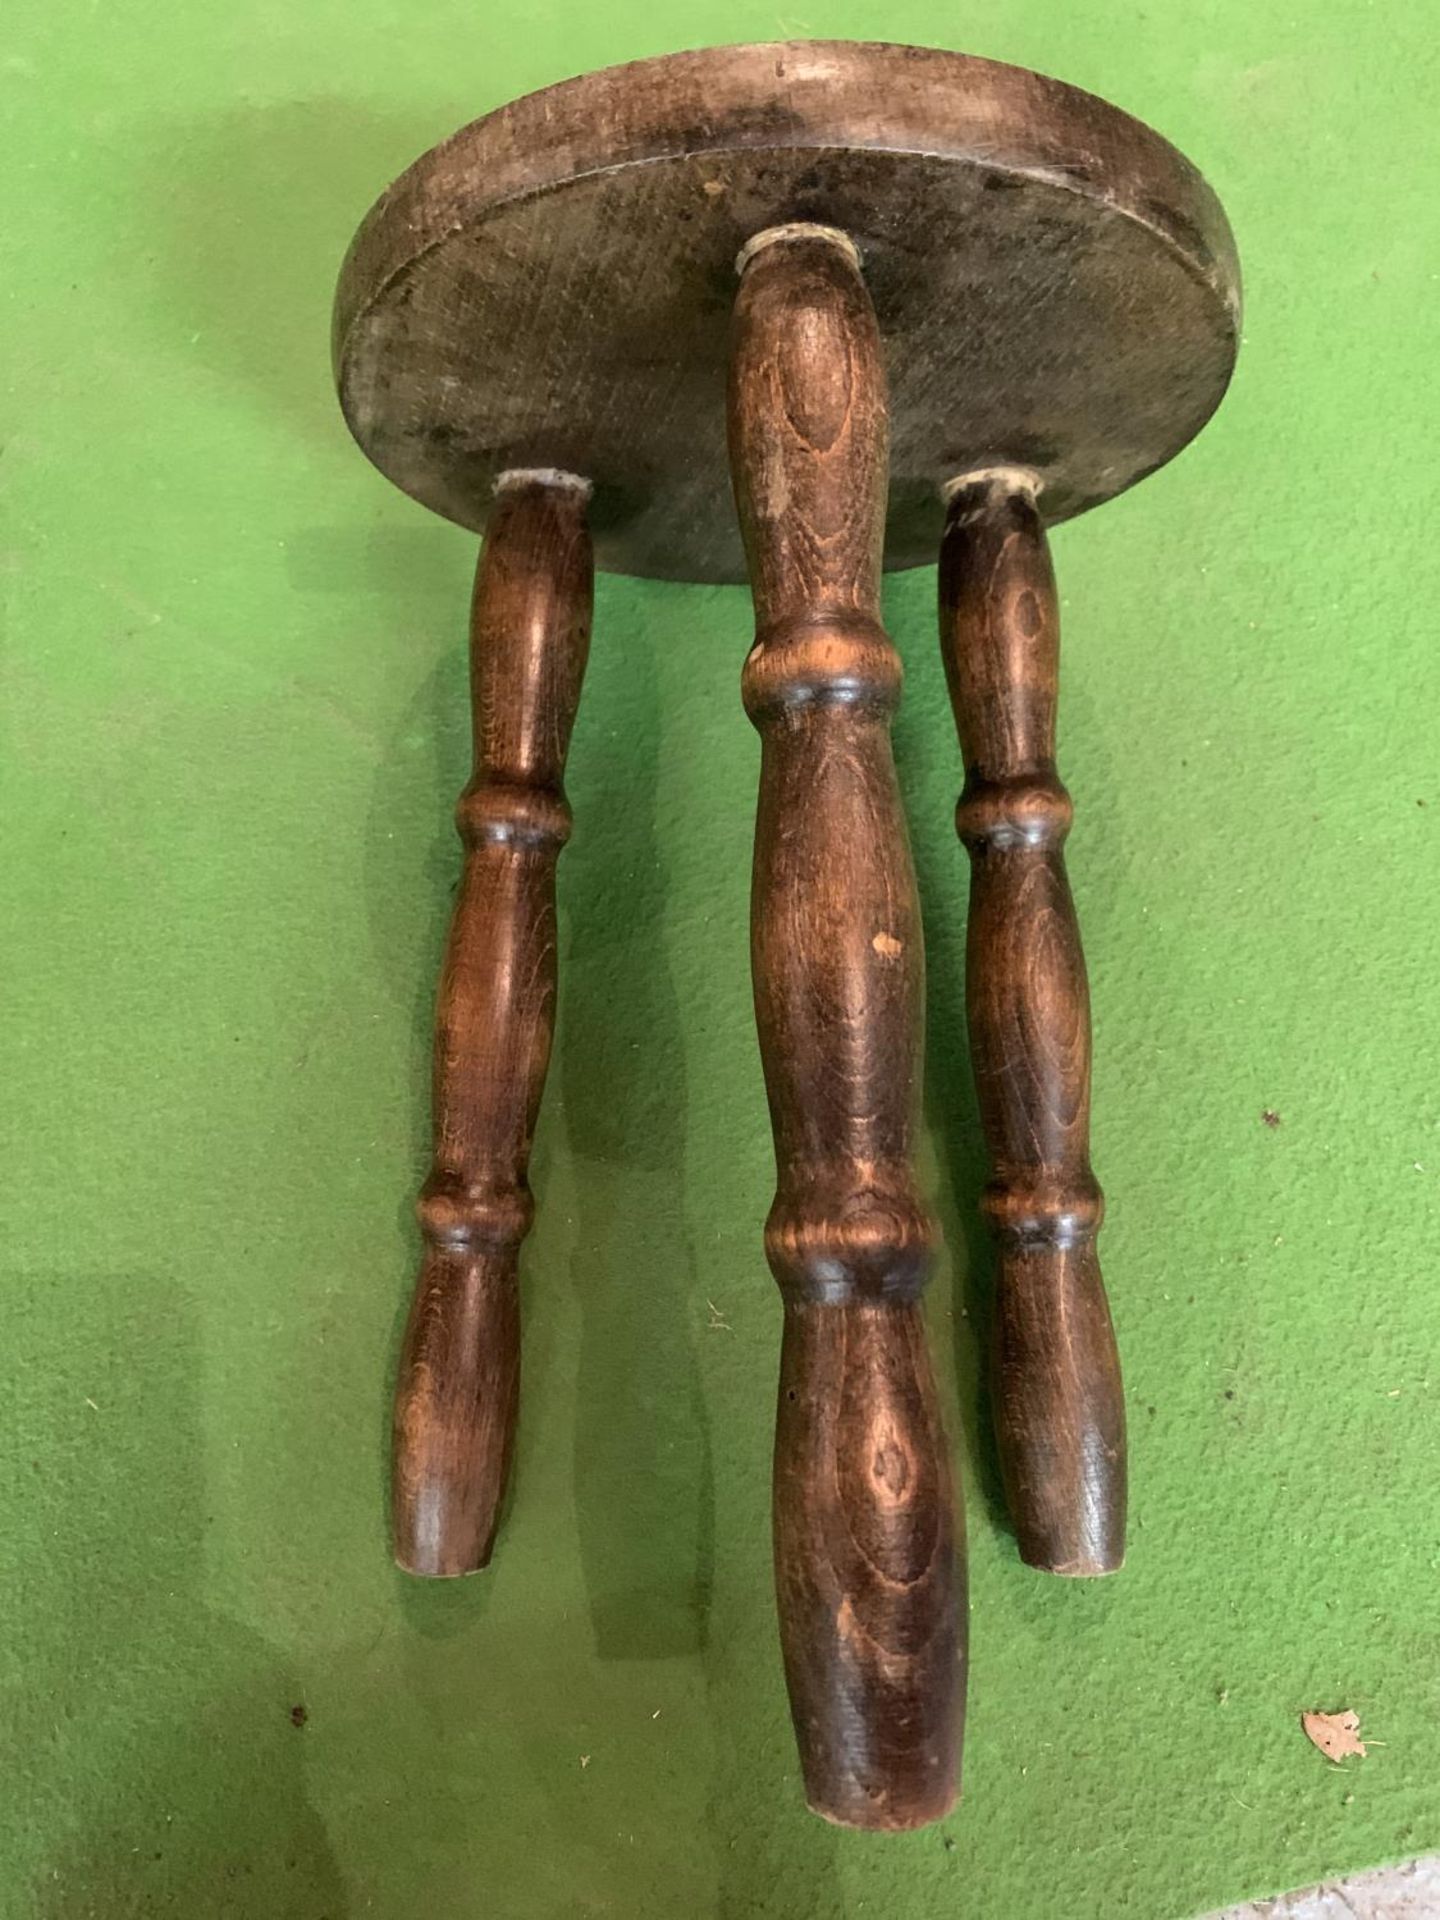 A SMALL OAK STOOL WITH THREE LEGS - Image 2 of 2